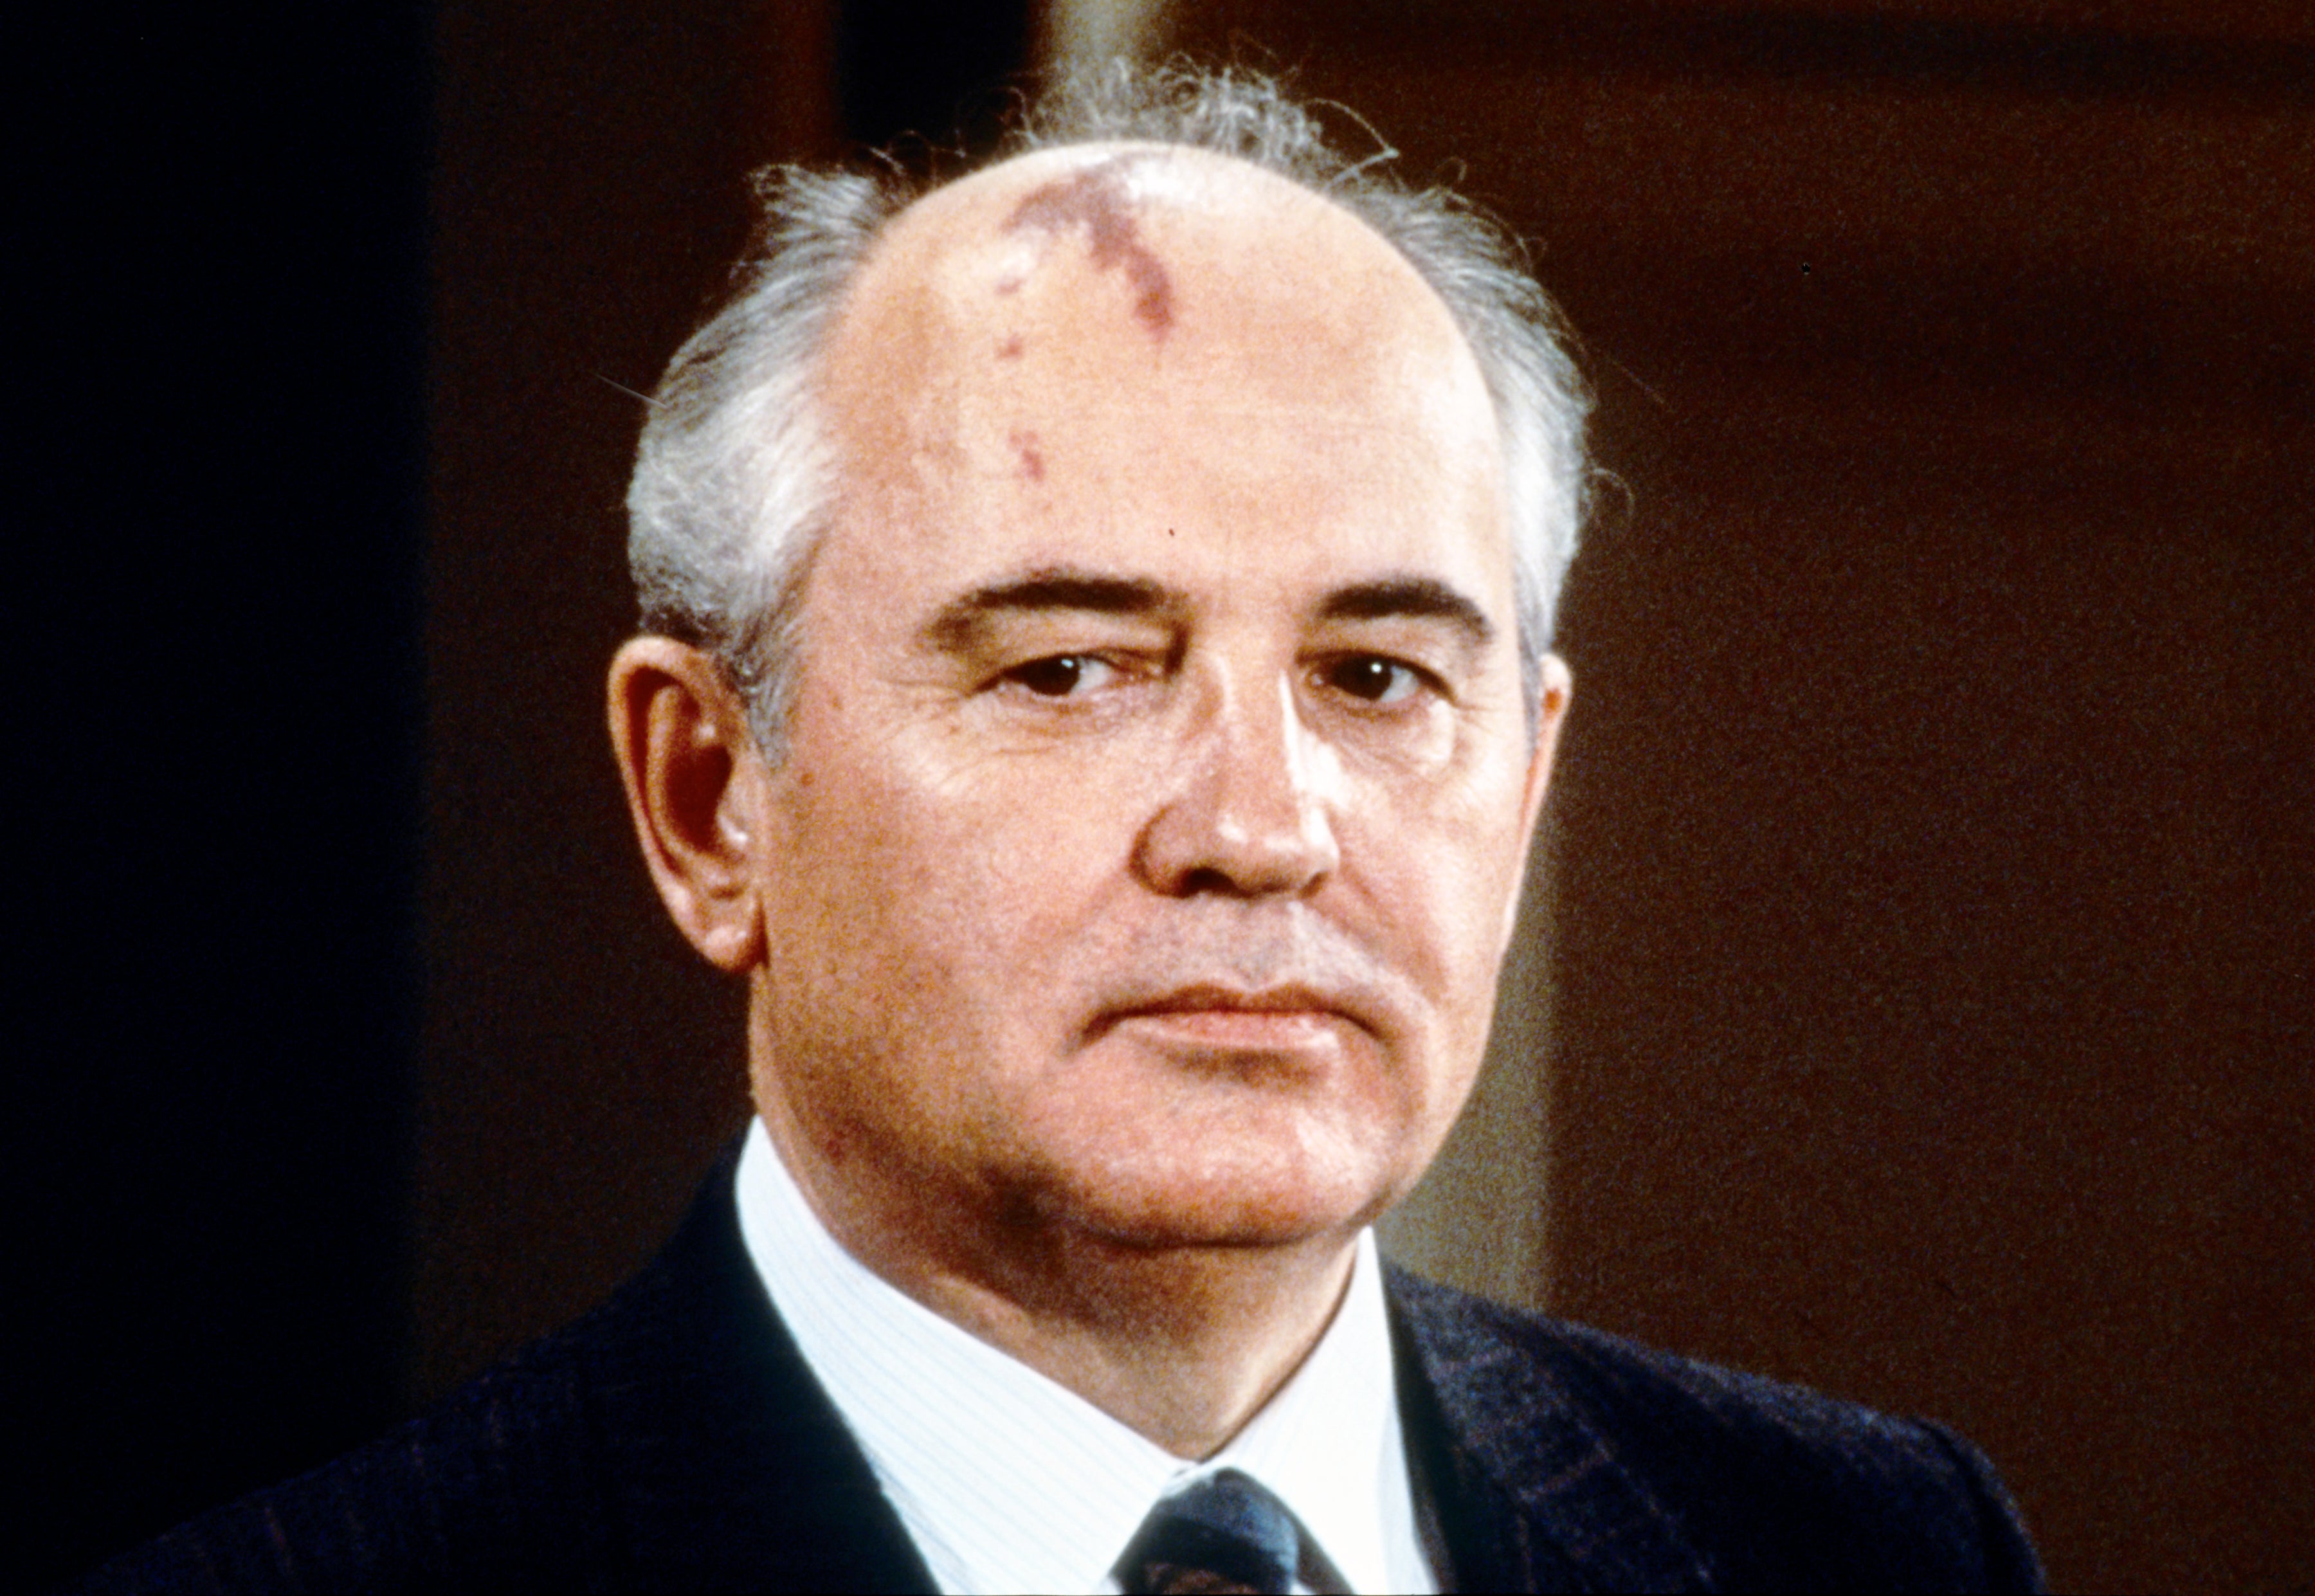 Gorbachev wearing a slight frown. His head splotch is visible.